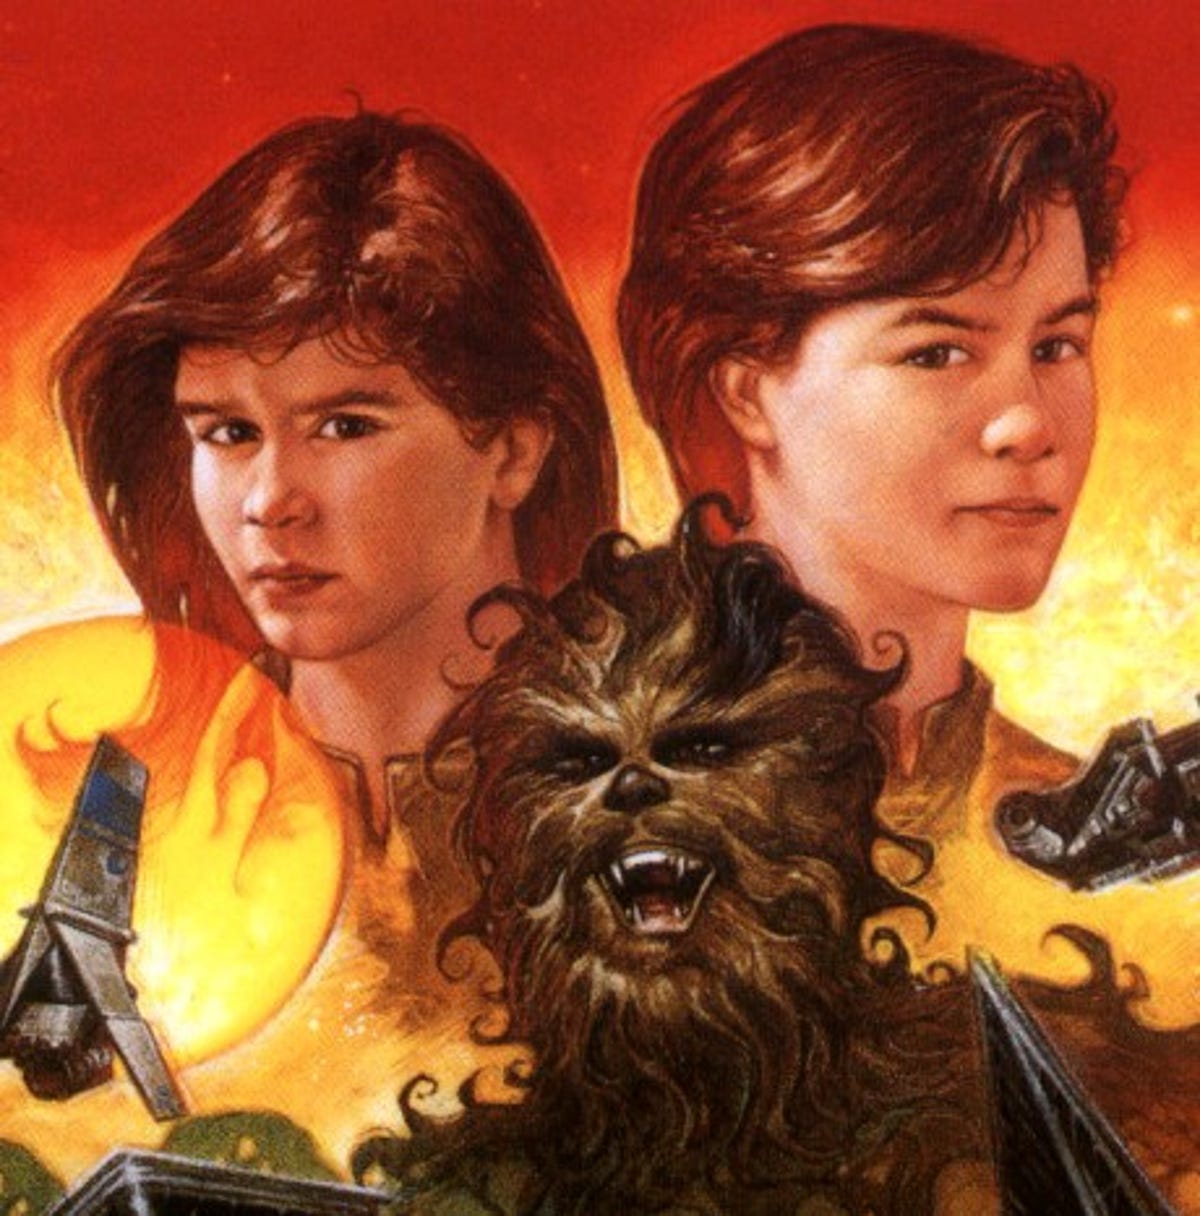 Han and Leia's twin children, Jacen and Jaina Solo, have adventures with Chewbacca's nephew Lowie in the Expanded Universe 